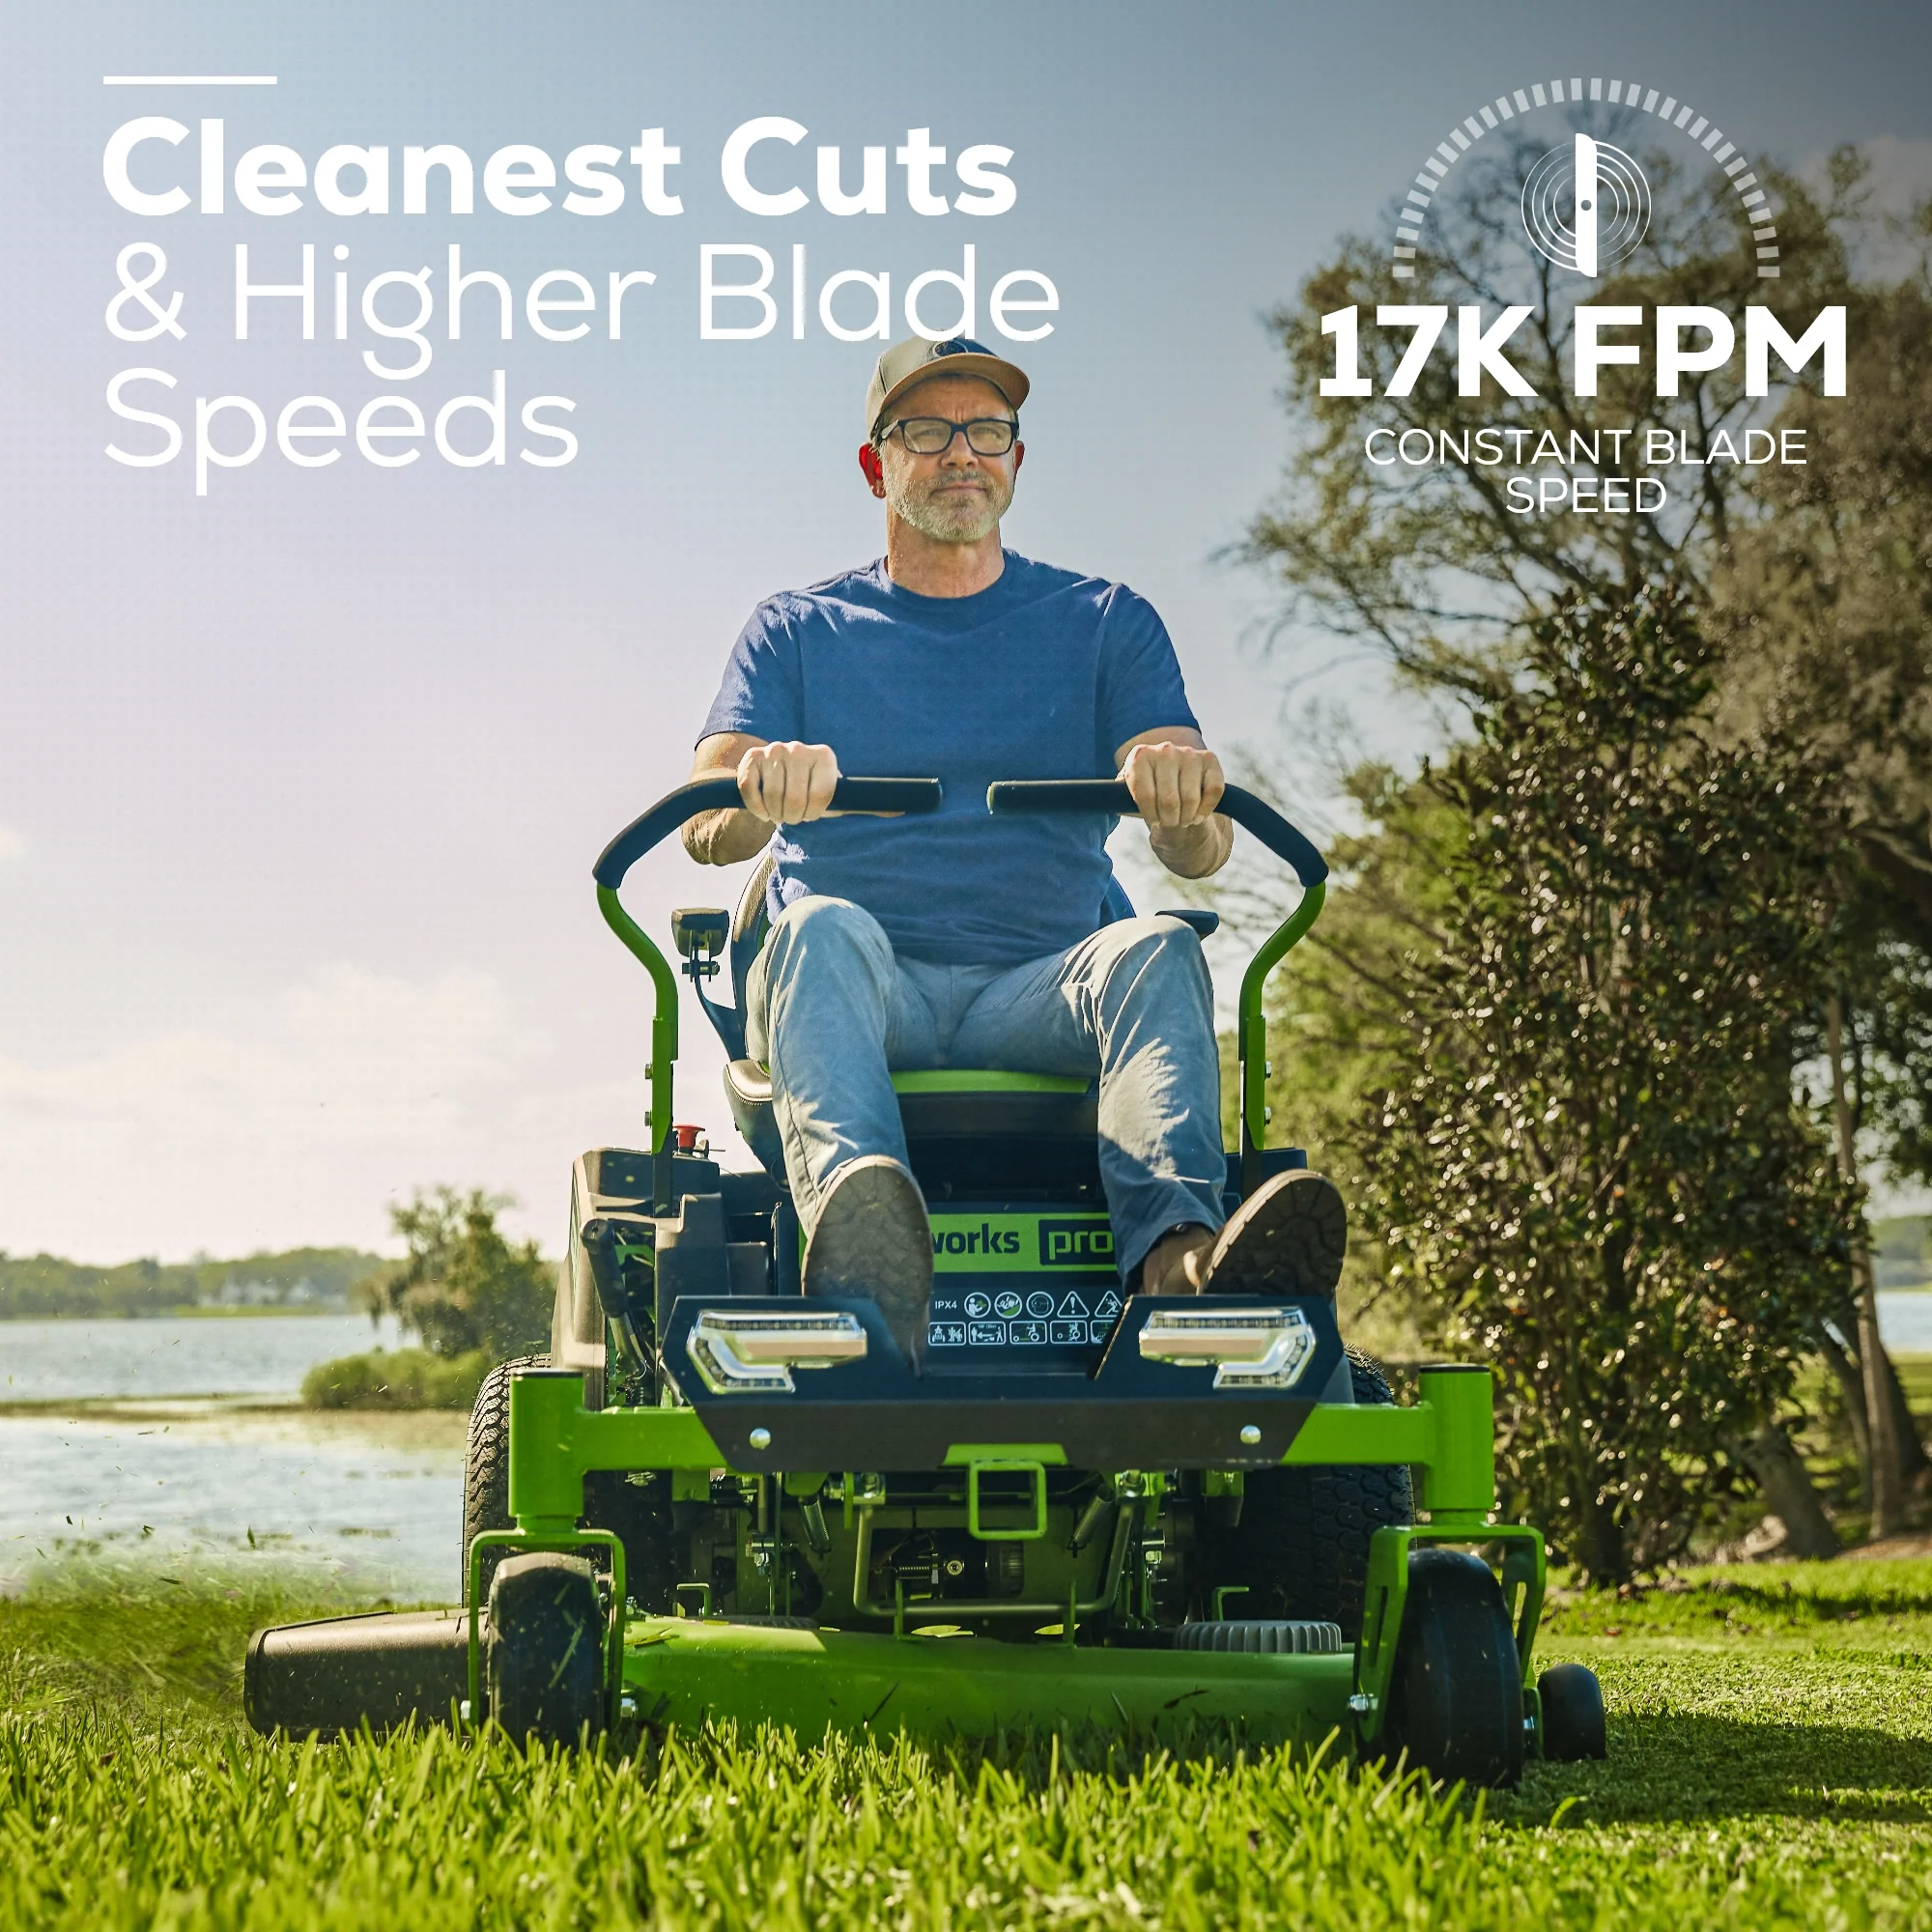 Greenworks Highlights New Zero-Turn Mower From: Greenworks Commercial